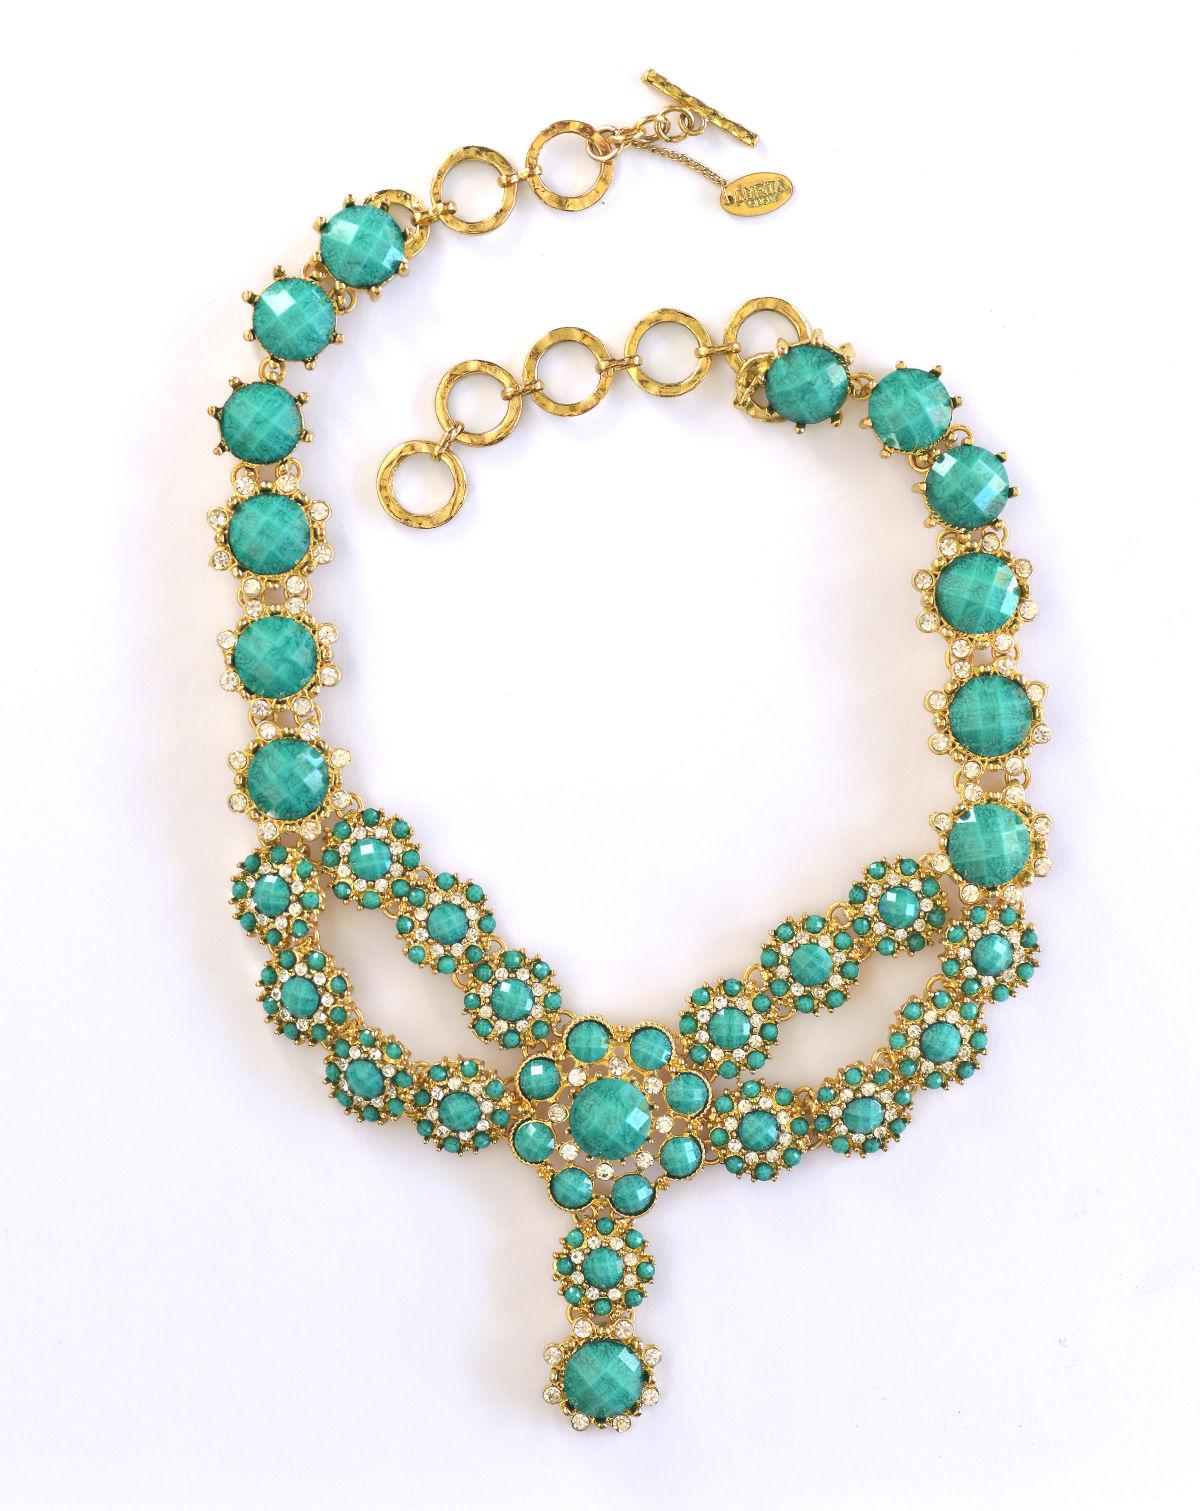 Mix-and-match jewelry makes extraordinary statement | Food + Living ...